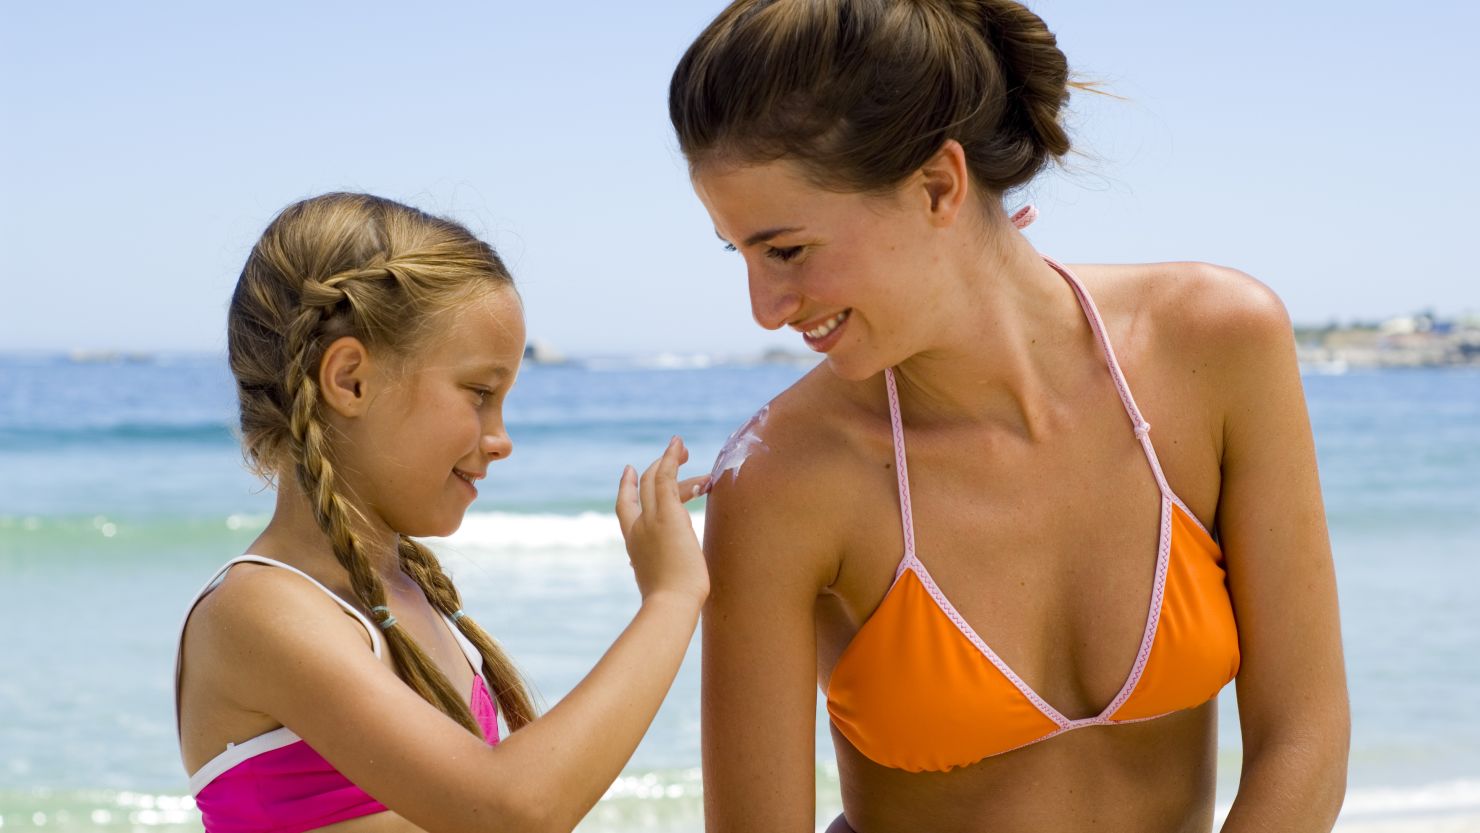 Dermatologist's Guide to Total Sun Protection: Favorite UPF Clothing, Hats,  Sunscreen, & More! 